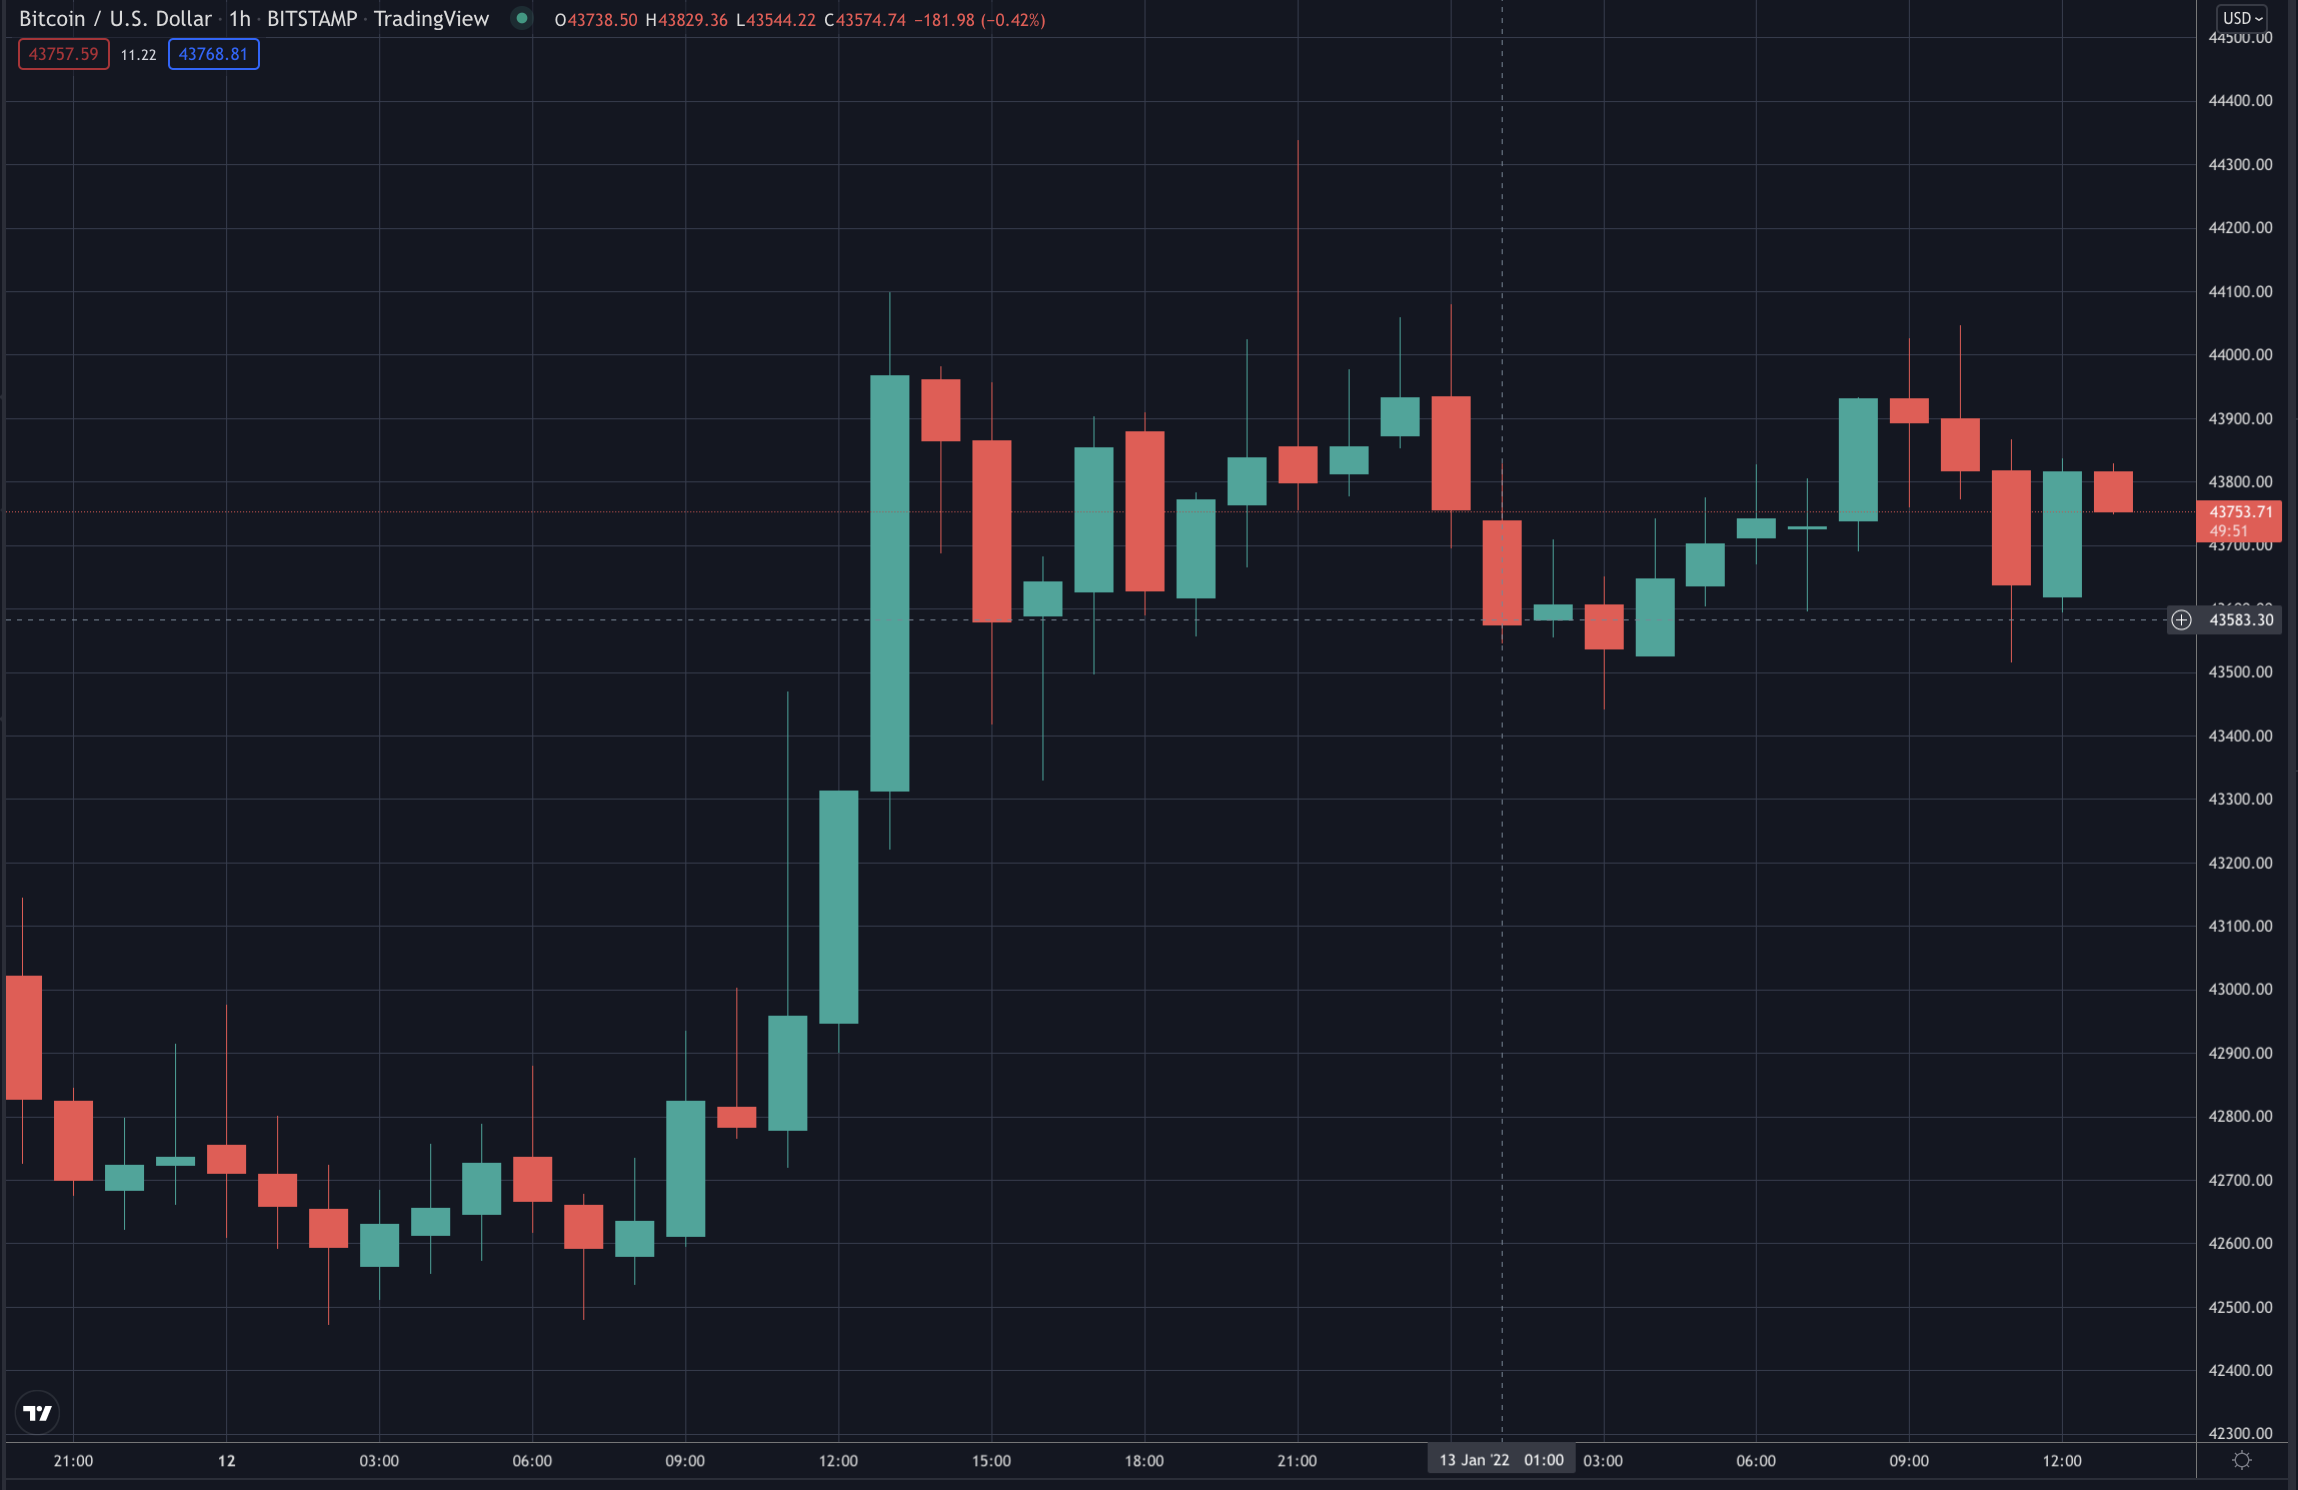 Bitcoin's price during China trading hours, Jan 2022